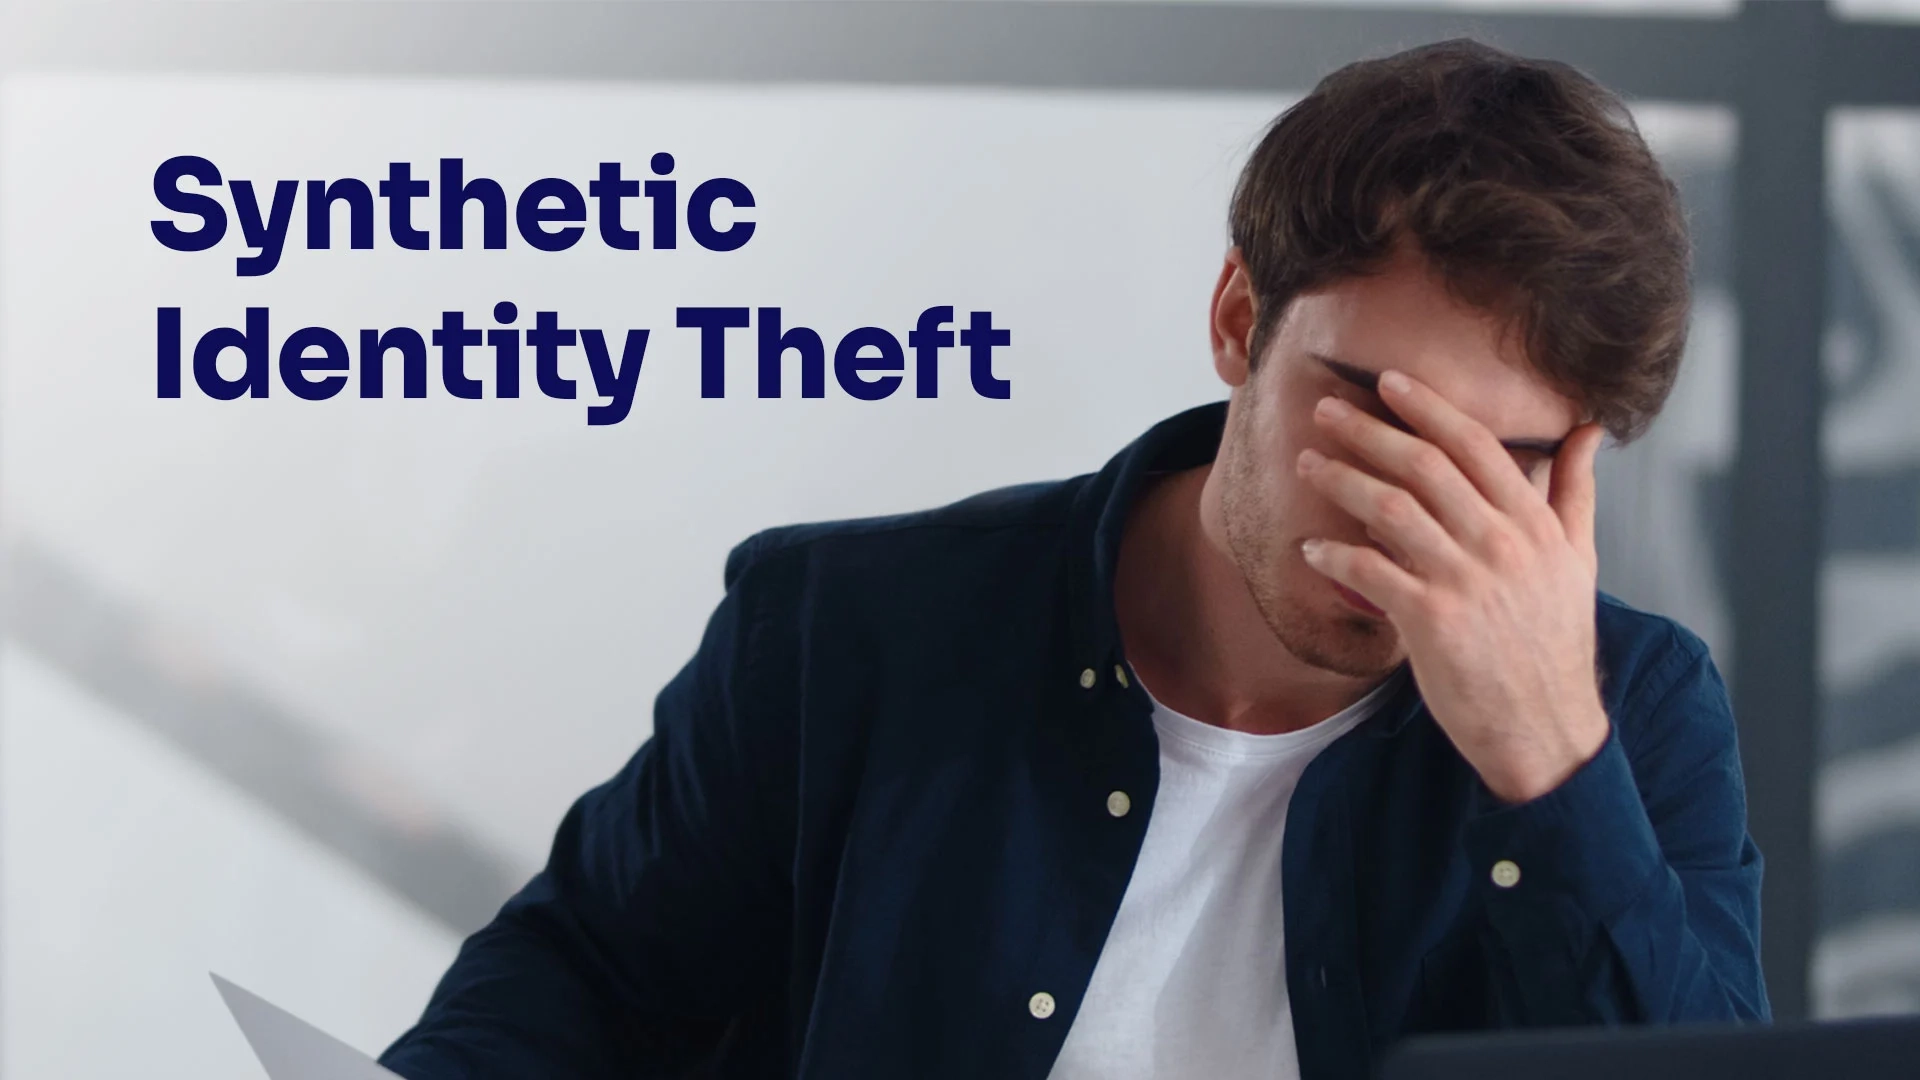 man facepalming because of synthetic identity theft